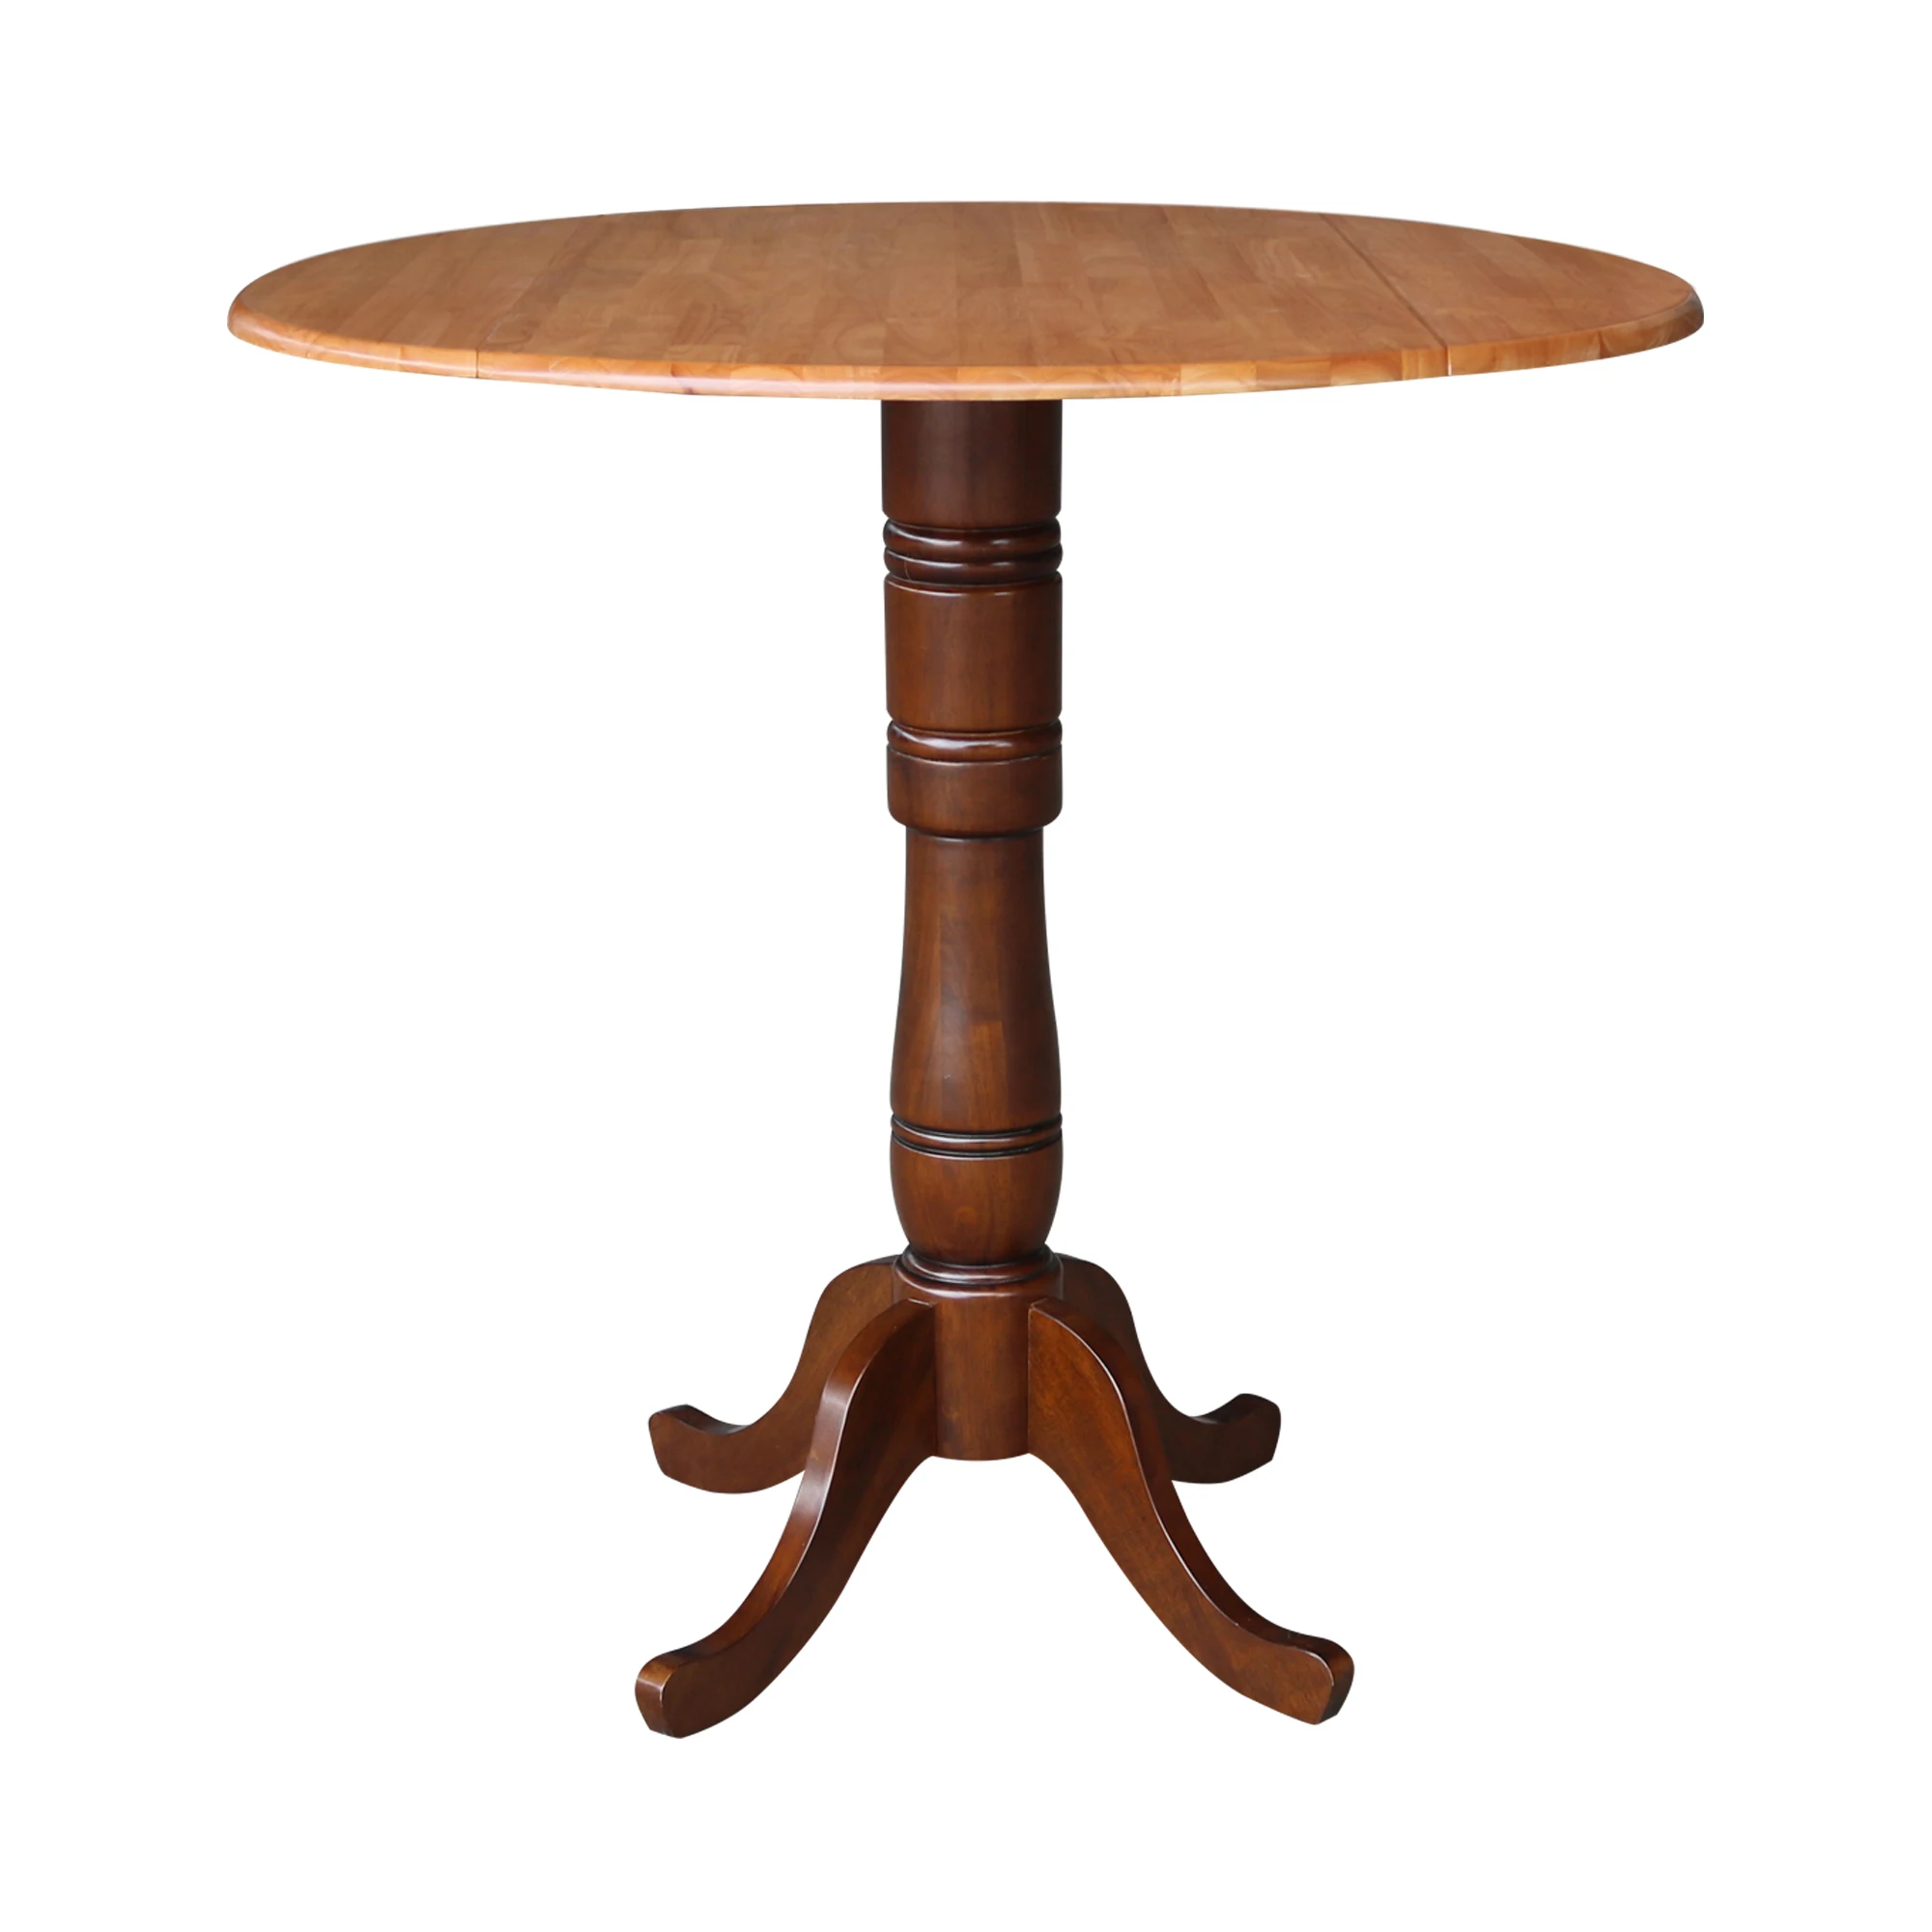 

42Inch Round Solid Wood Dual Drop Leaf Pedestal Table in Cinnamon/Espresso - 41.5"H Bar Height by International Concepts